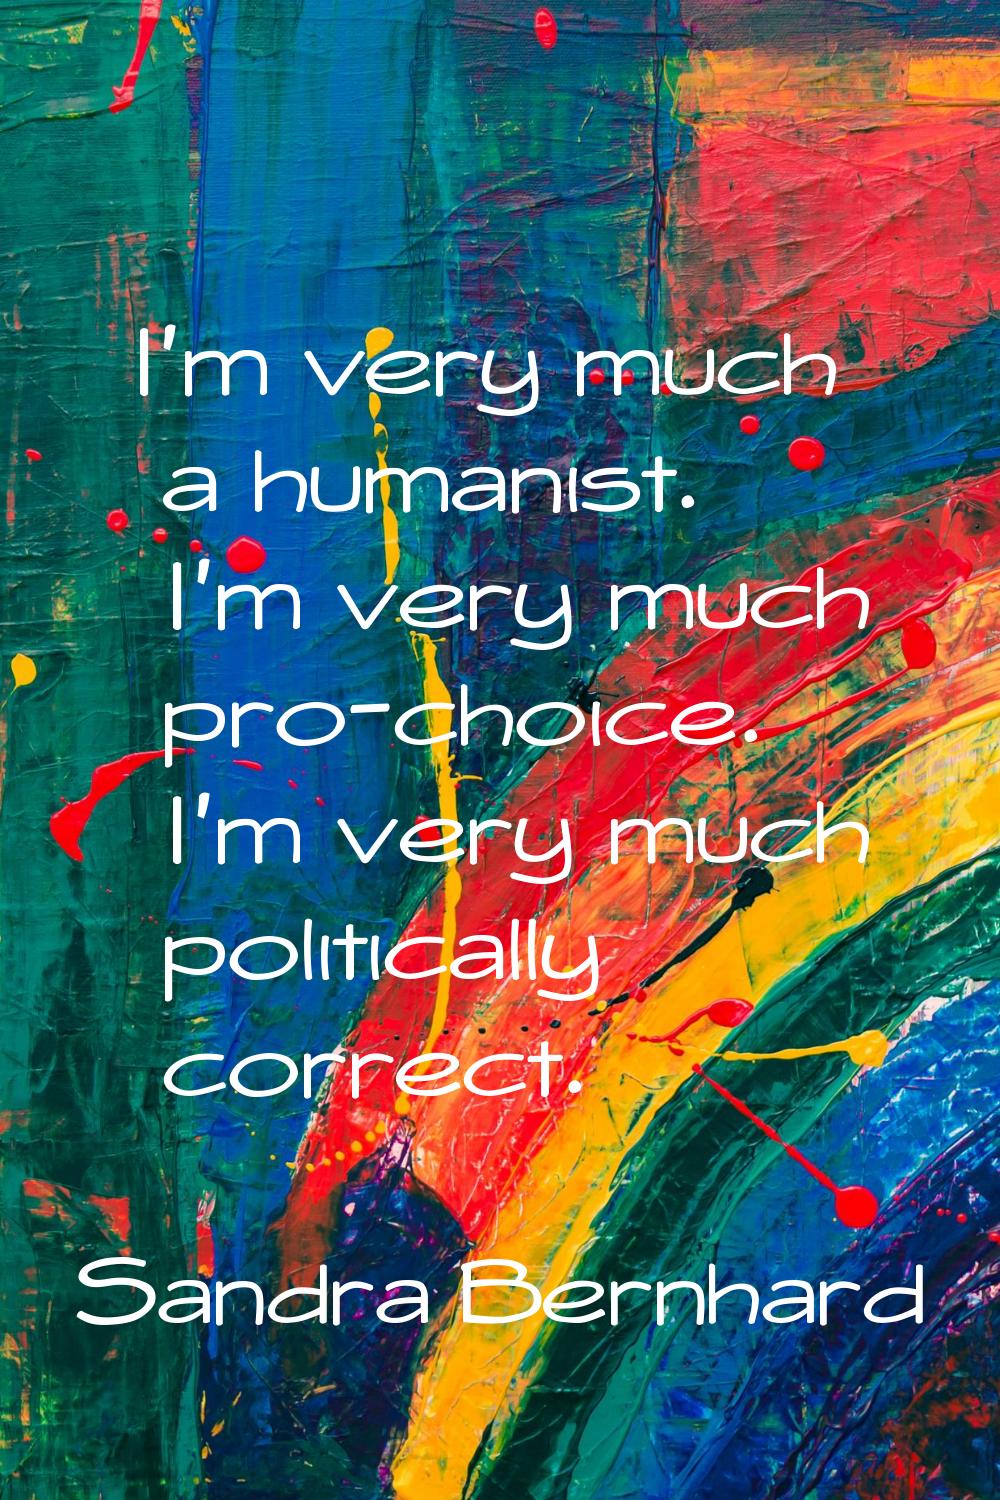 I'm very much a humanist. I'm very much pro-choice. I'm very much politically correct.